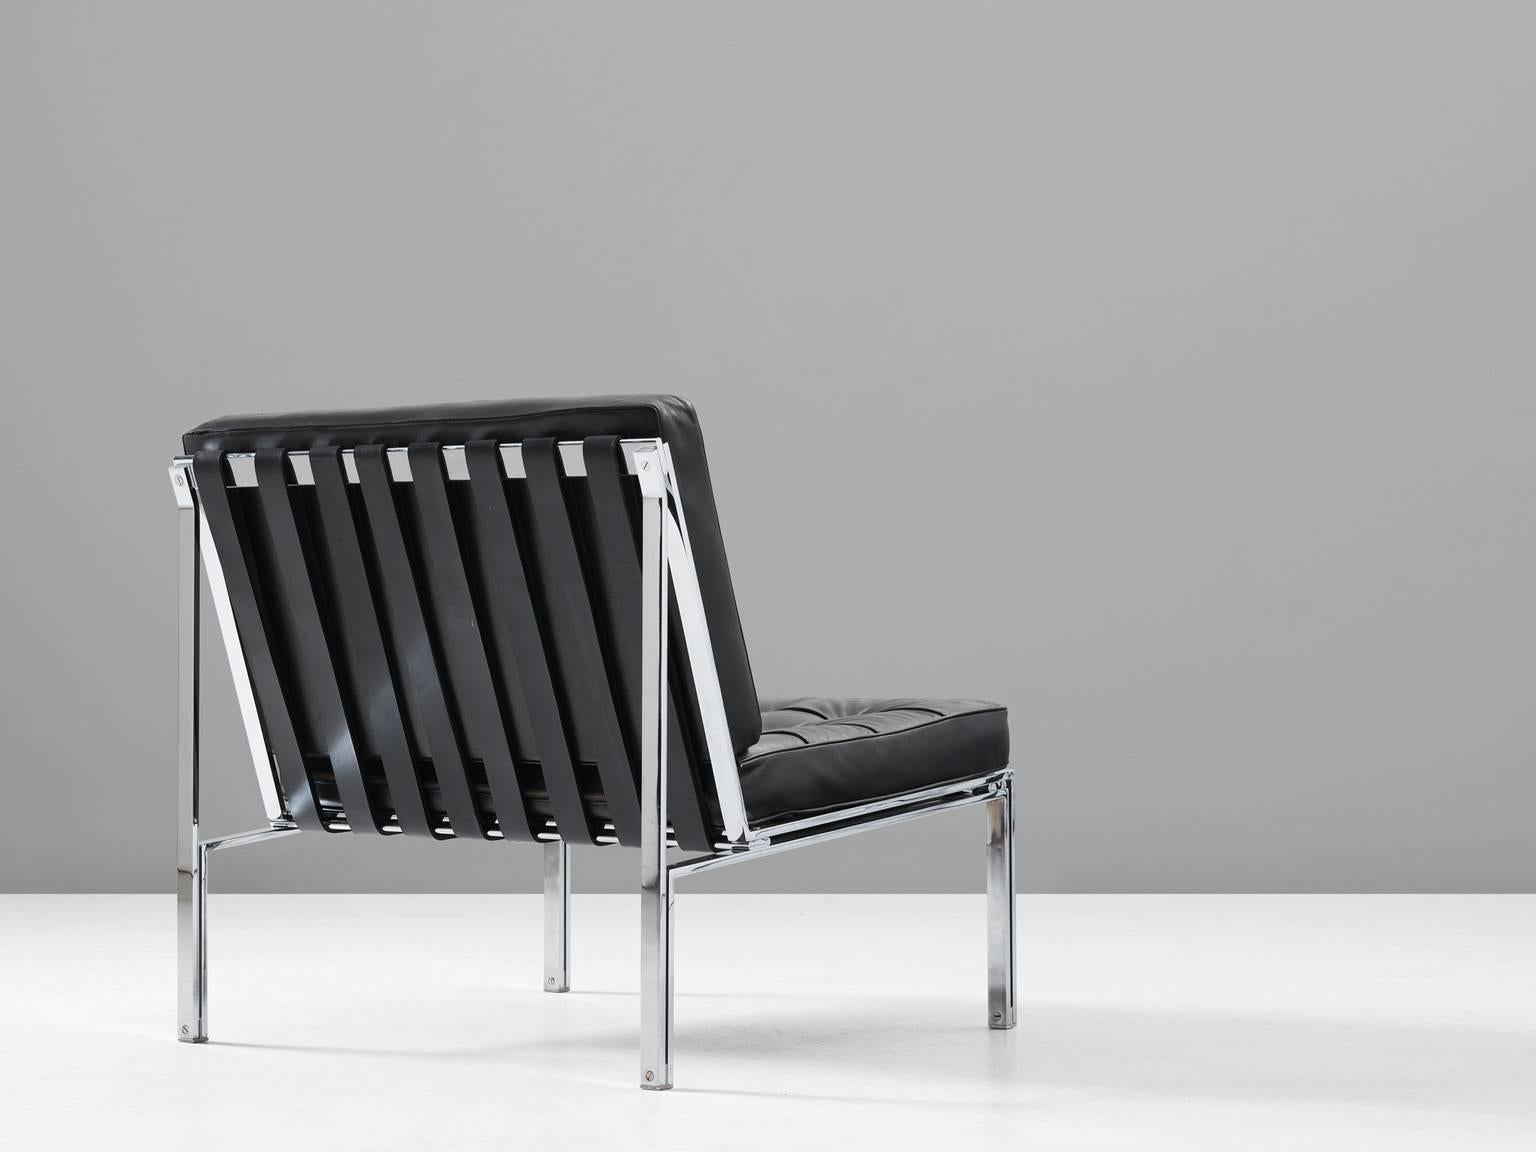 Lounge chair KT-221, in chromed metal and black leather, by Kurth Thutt for Desede, Switzerland, 1956.

Modern and sleek chair by Swiss designer Kurth Thut. This architectural piece consist of a chromed steel frame with leather straps as seating and